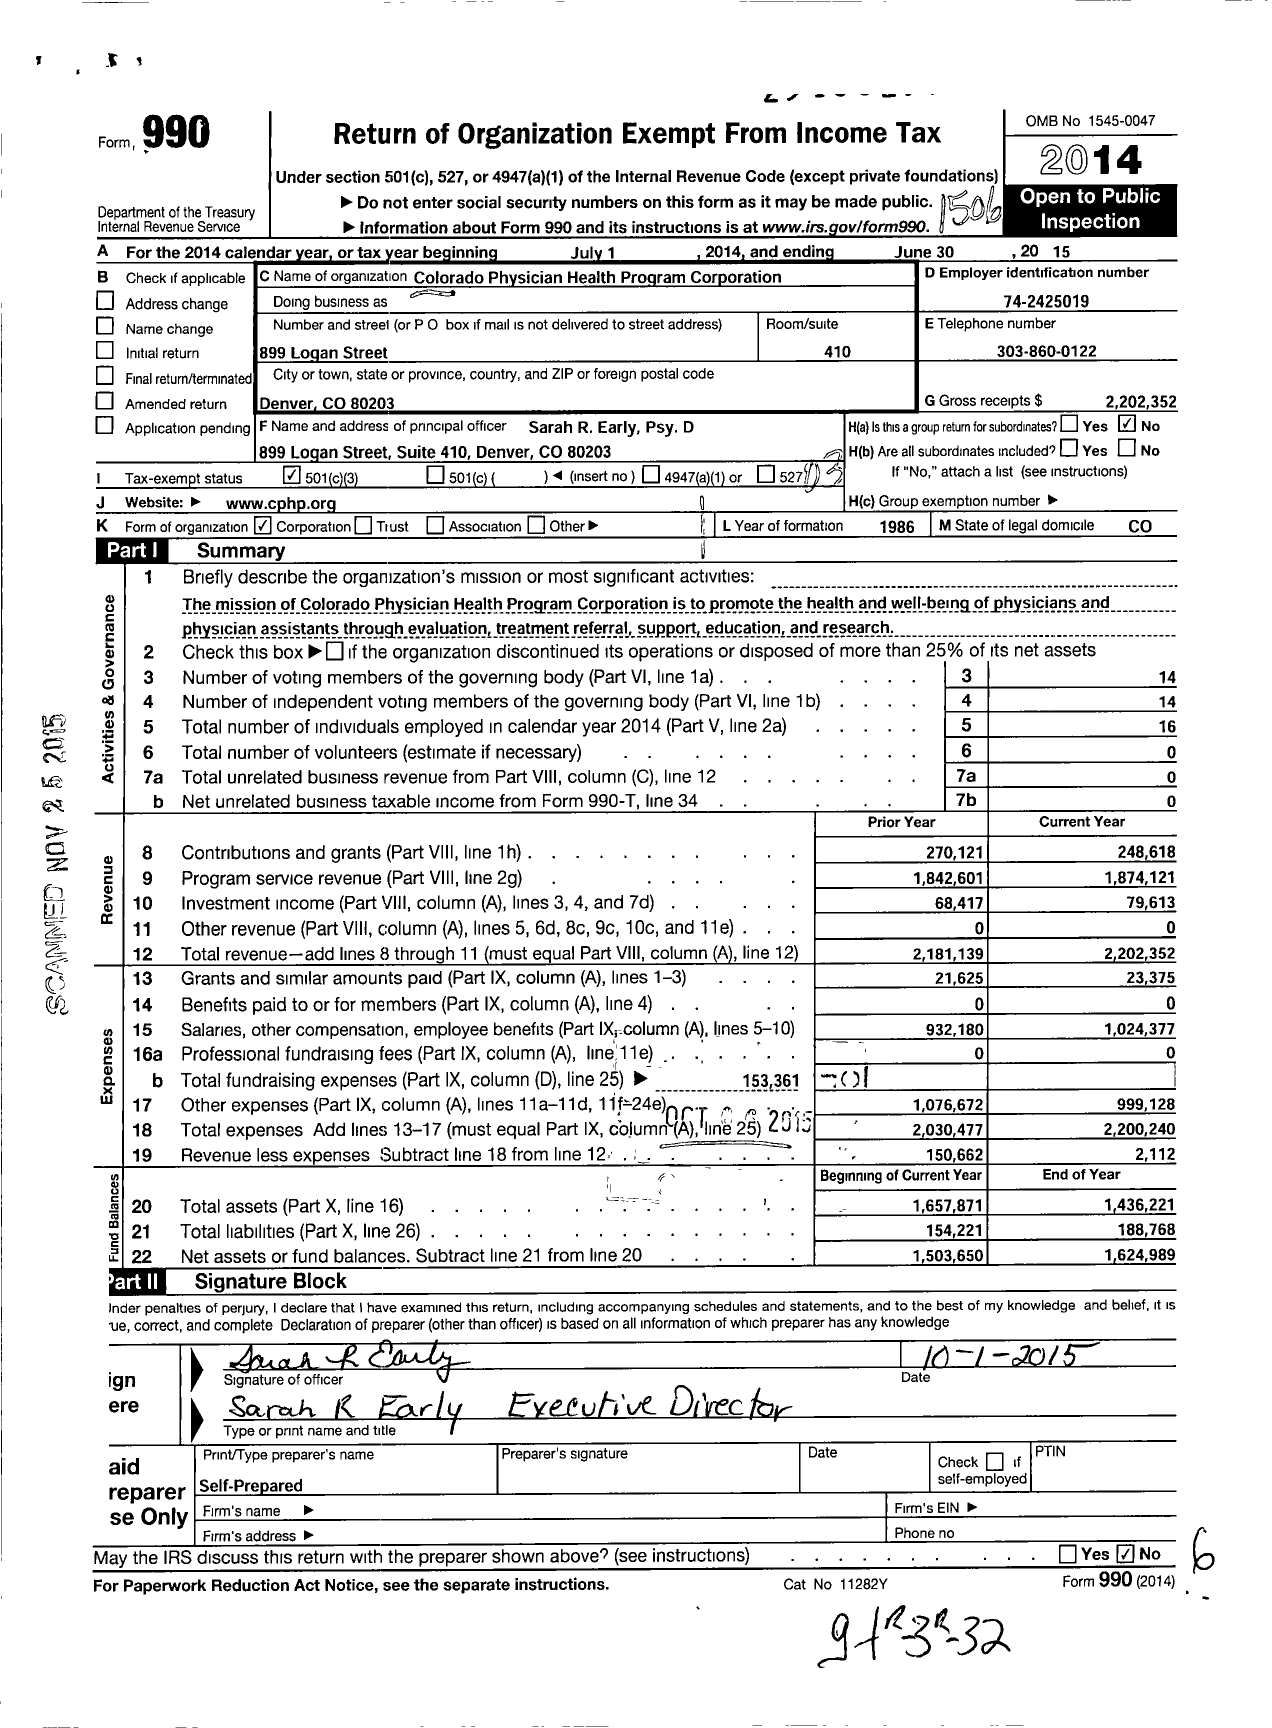 Image of first page of 2014 Form 990 for Colorado Physician Health Program Corporation